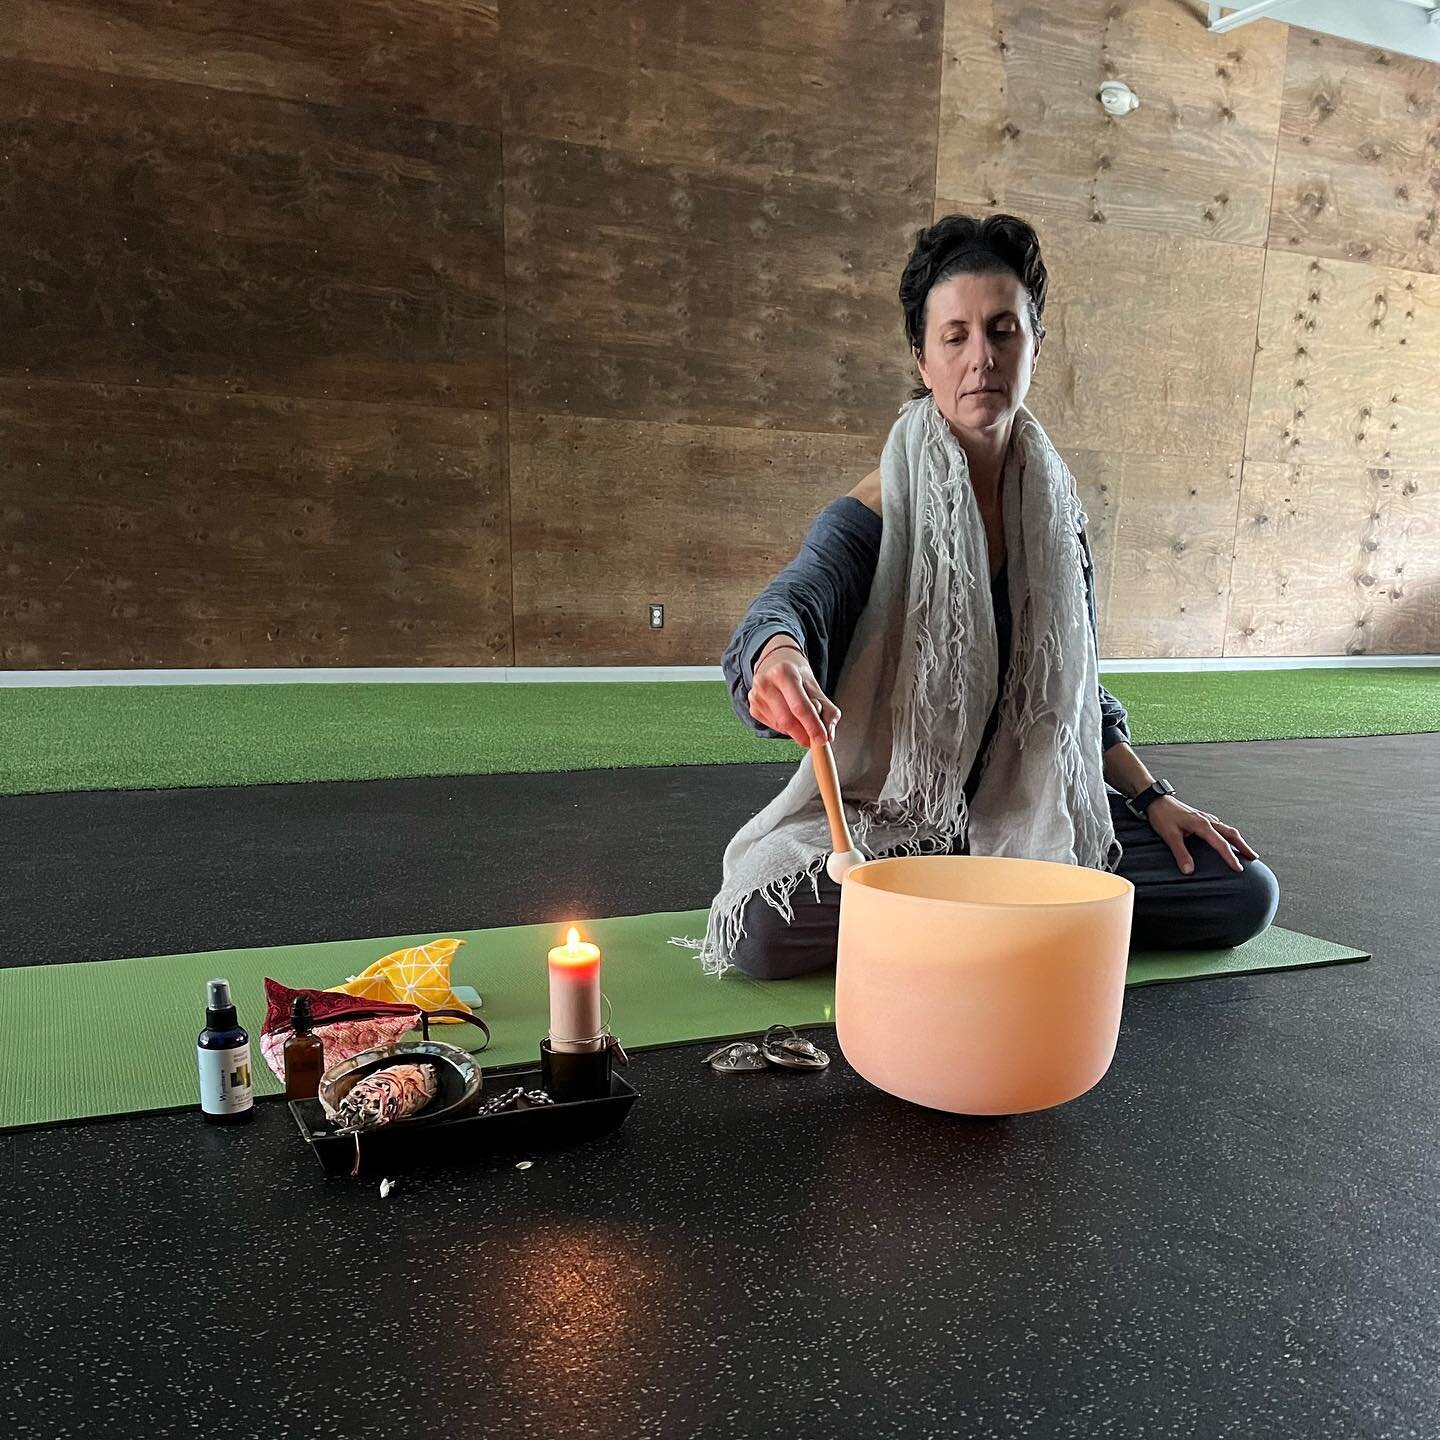 Yoga Flow with Monica today&mdash;10:15 AM. Drop-in passes available. 🙌🏻

#poundridge #poundridgeny #bedfordny #newcanaanct #southsalem #northstamford